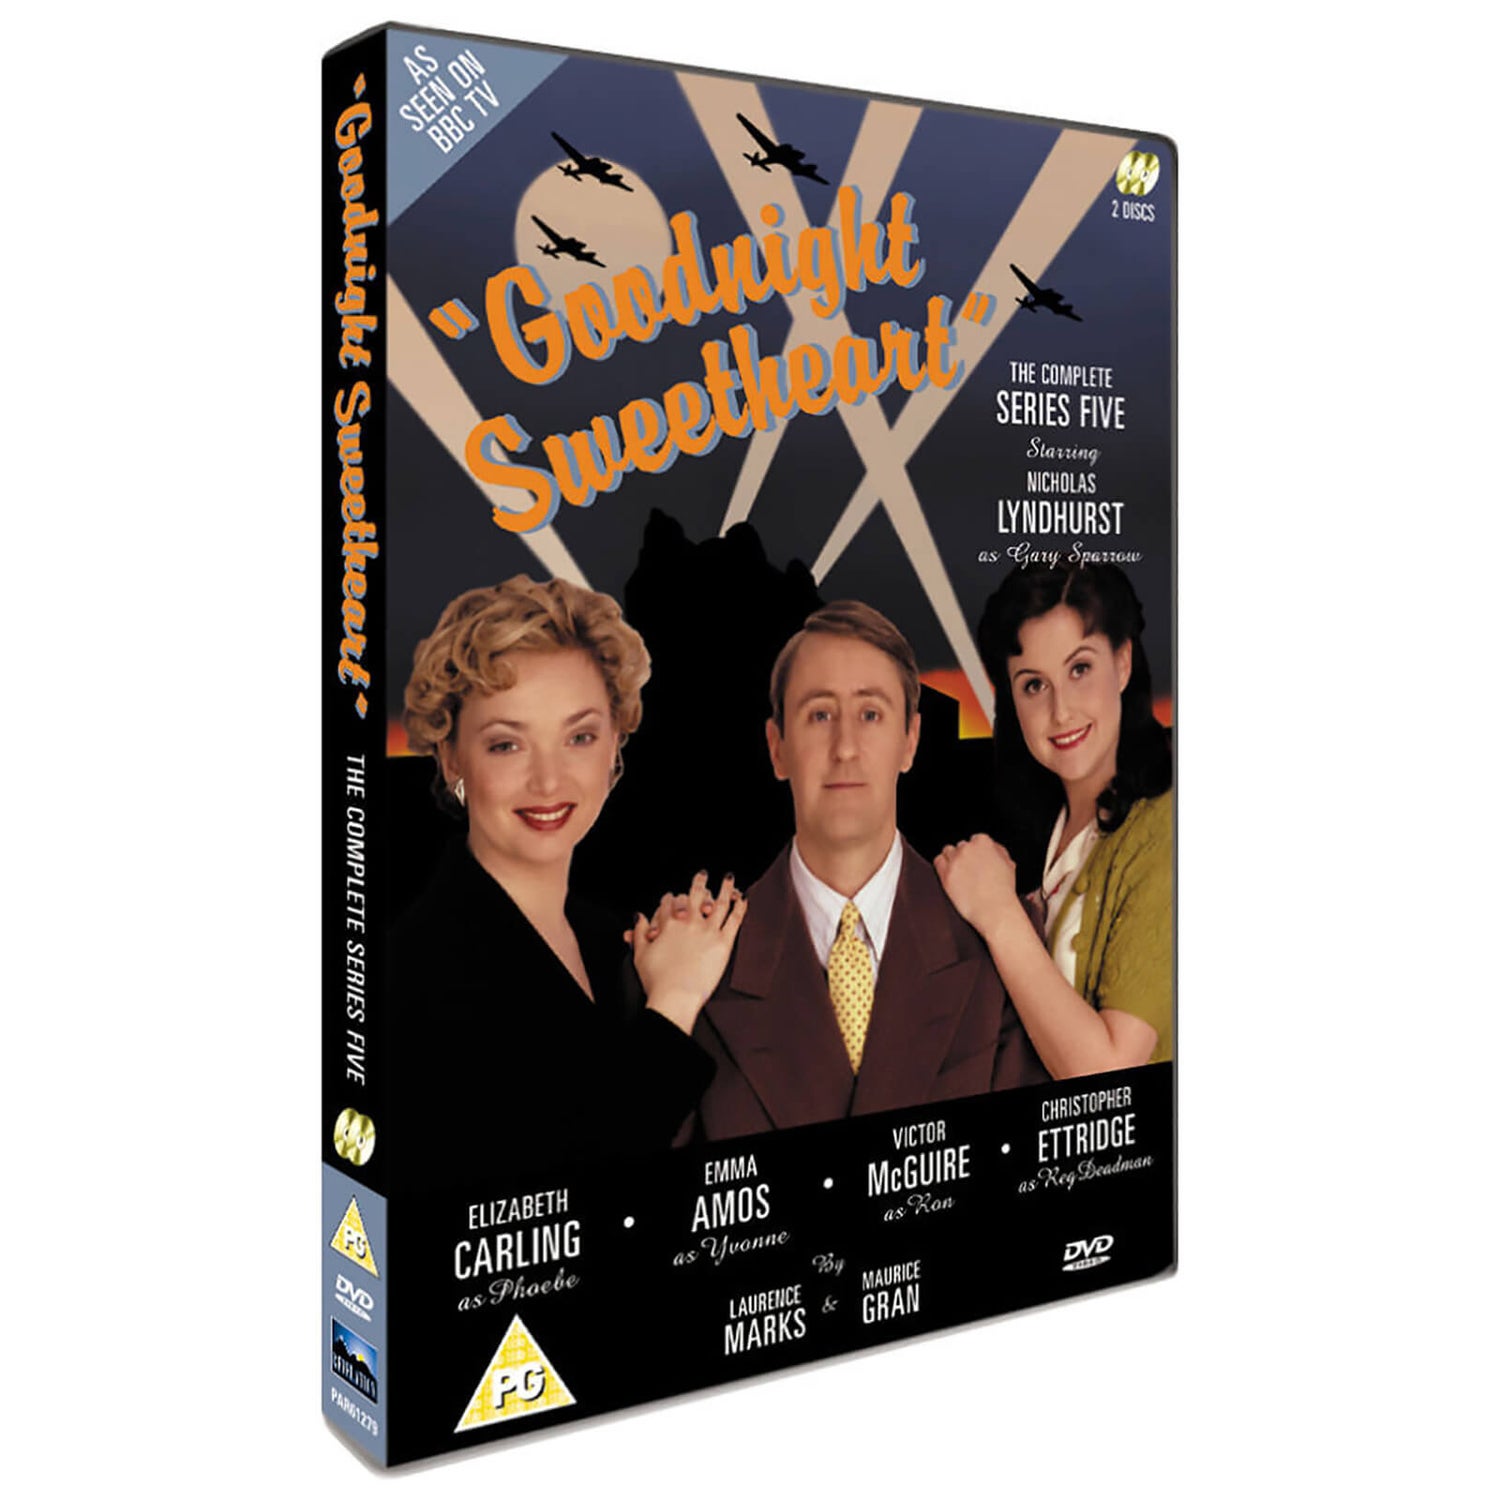 Goodnight Sweetheart - The Complete Series 5